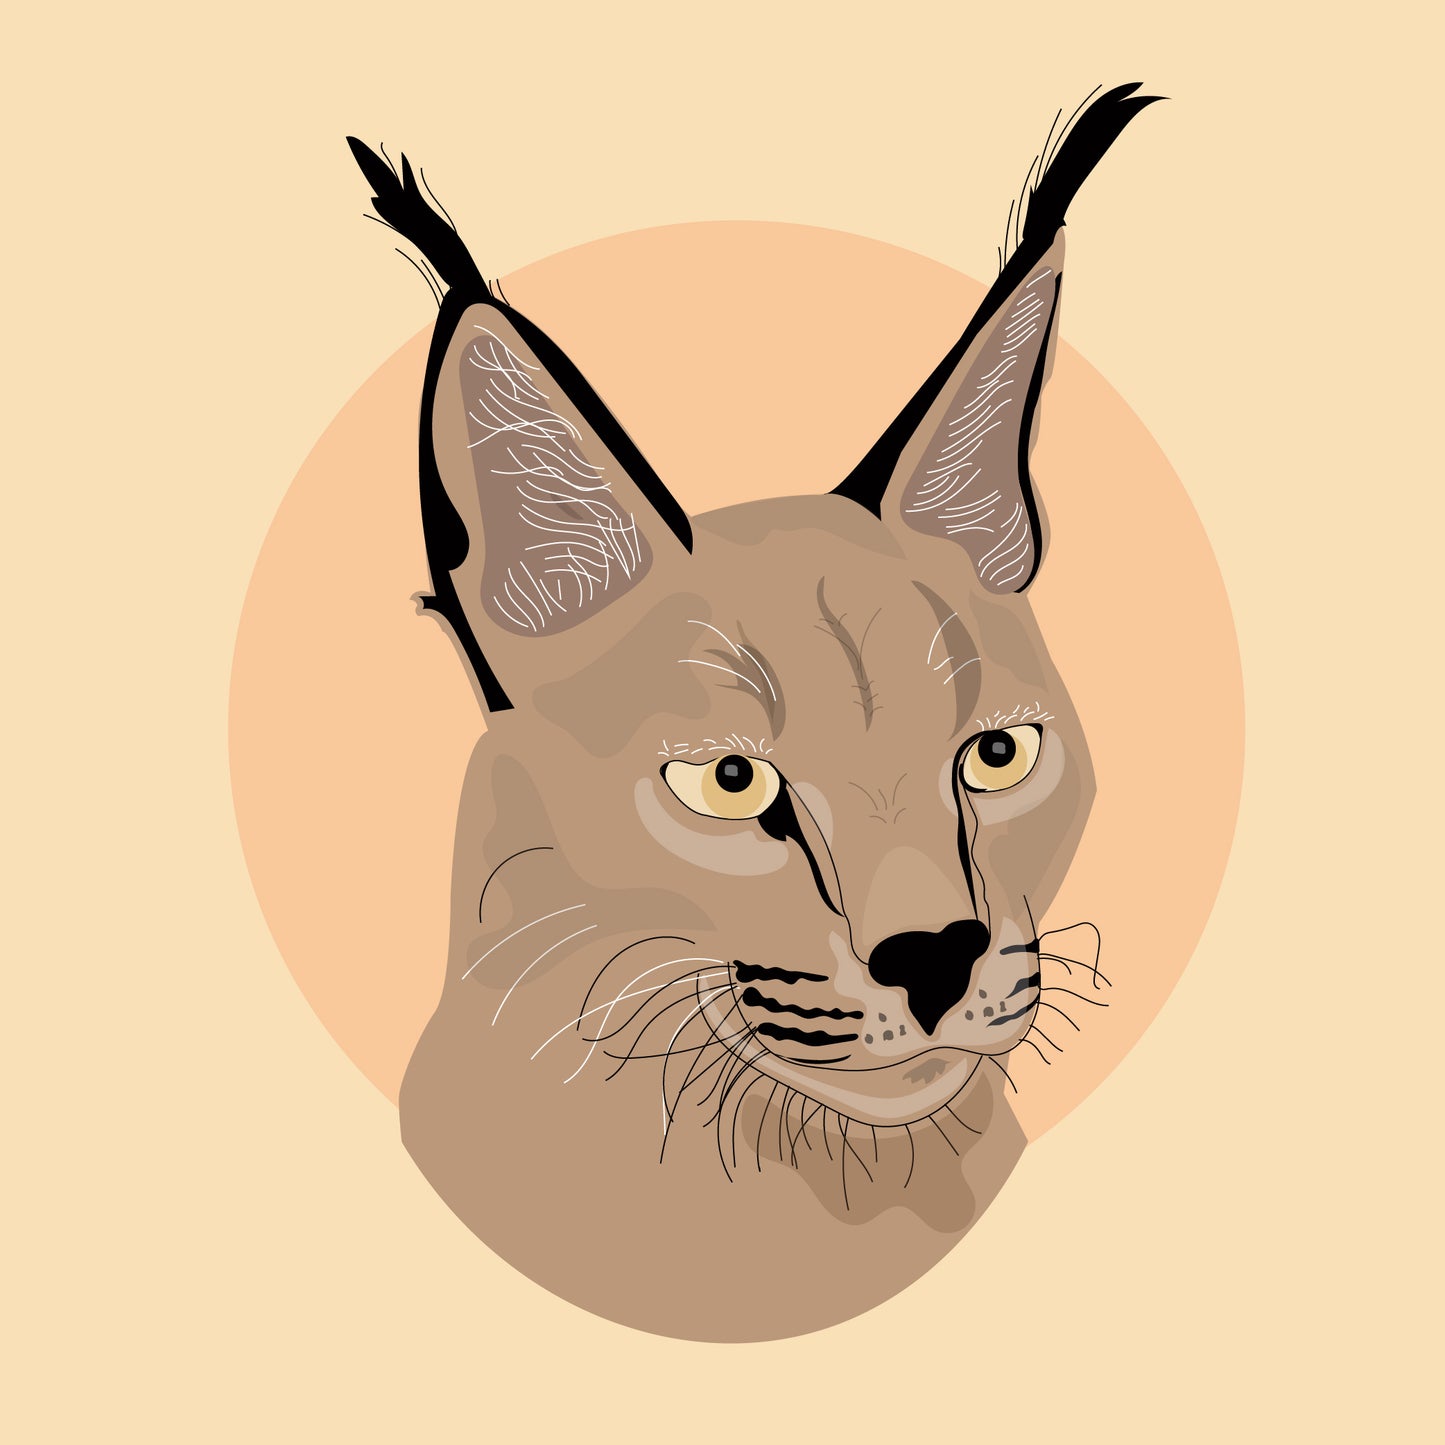 Wildlife T-Shirts  - The Caracal